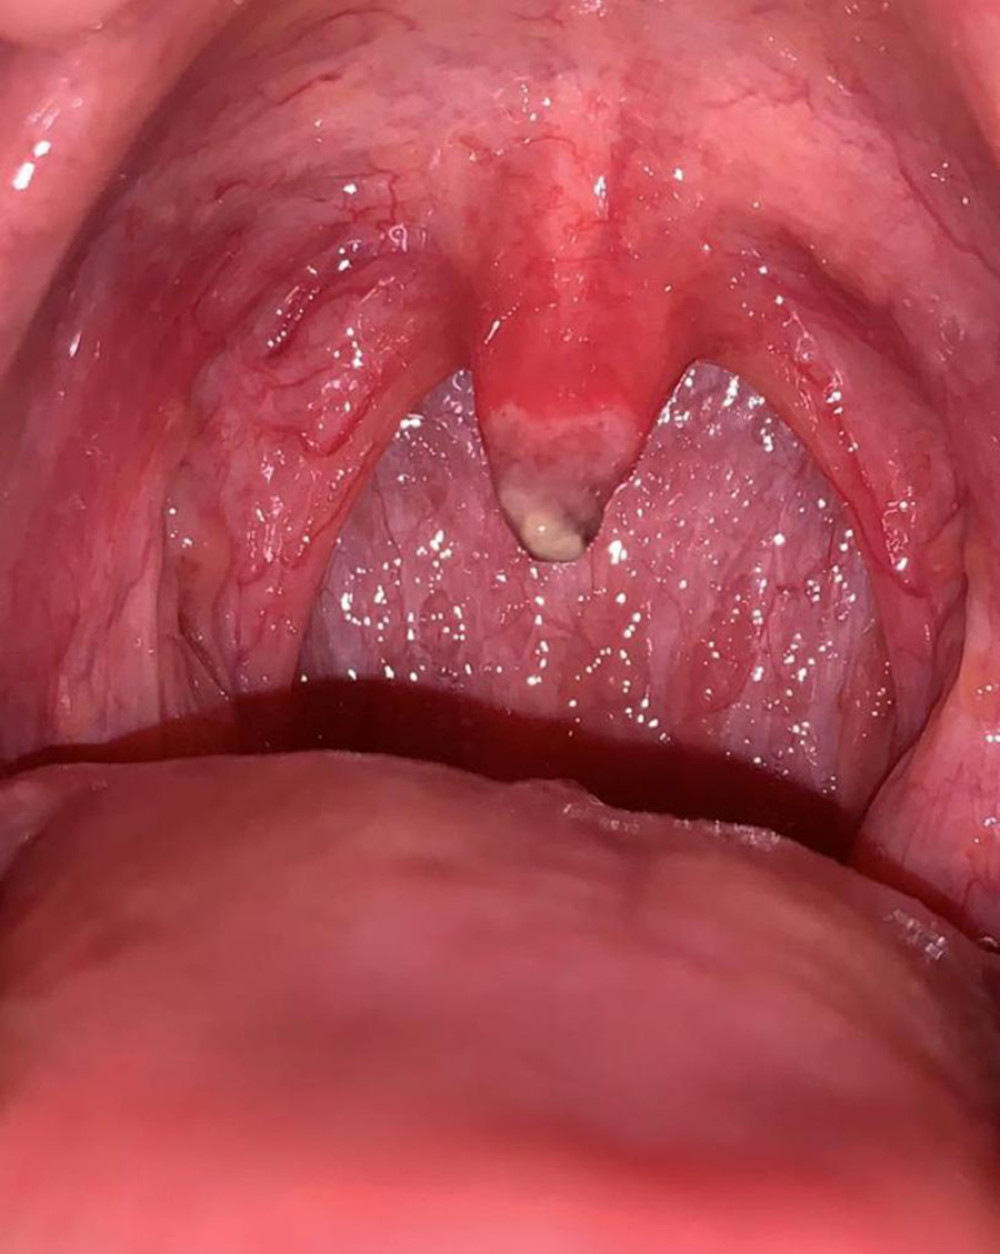 A necrotized uvula with yellow exudate was observed on day 1 after esophagogastroduodenoscopy (EGD).